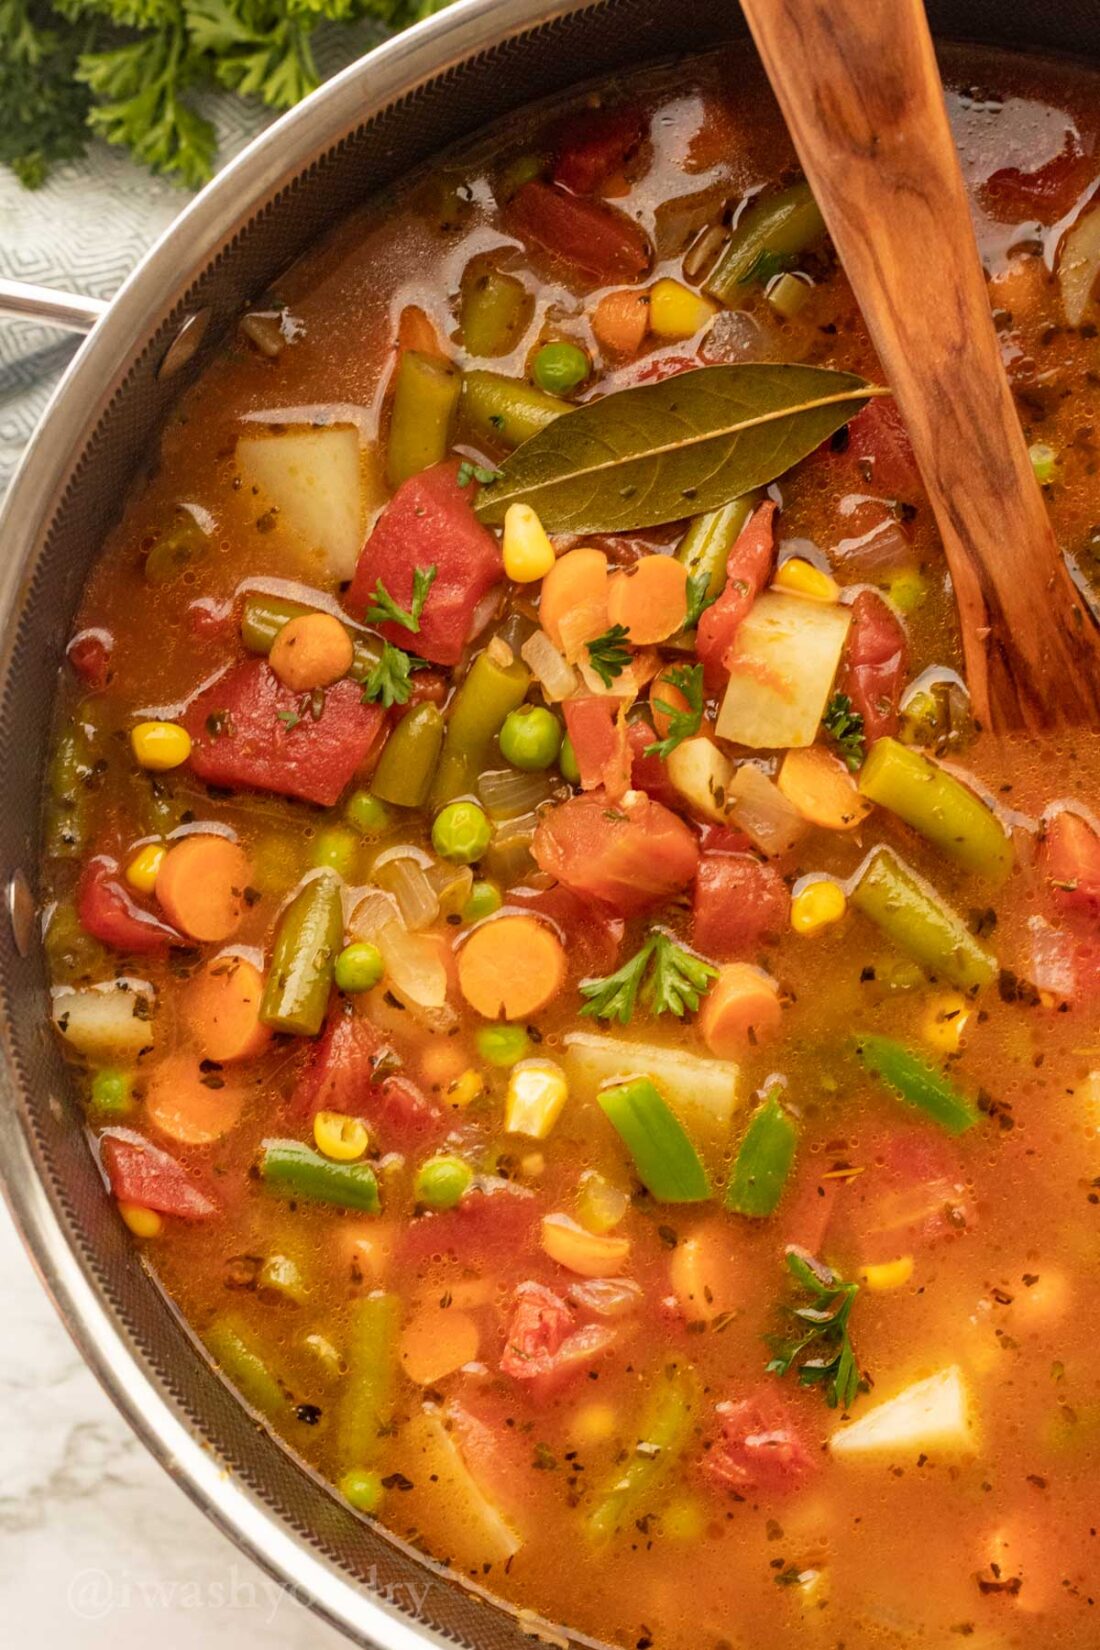 Pot of vegetable soup with plenty of carrots, potatoes and green beans.